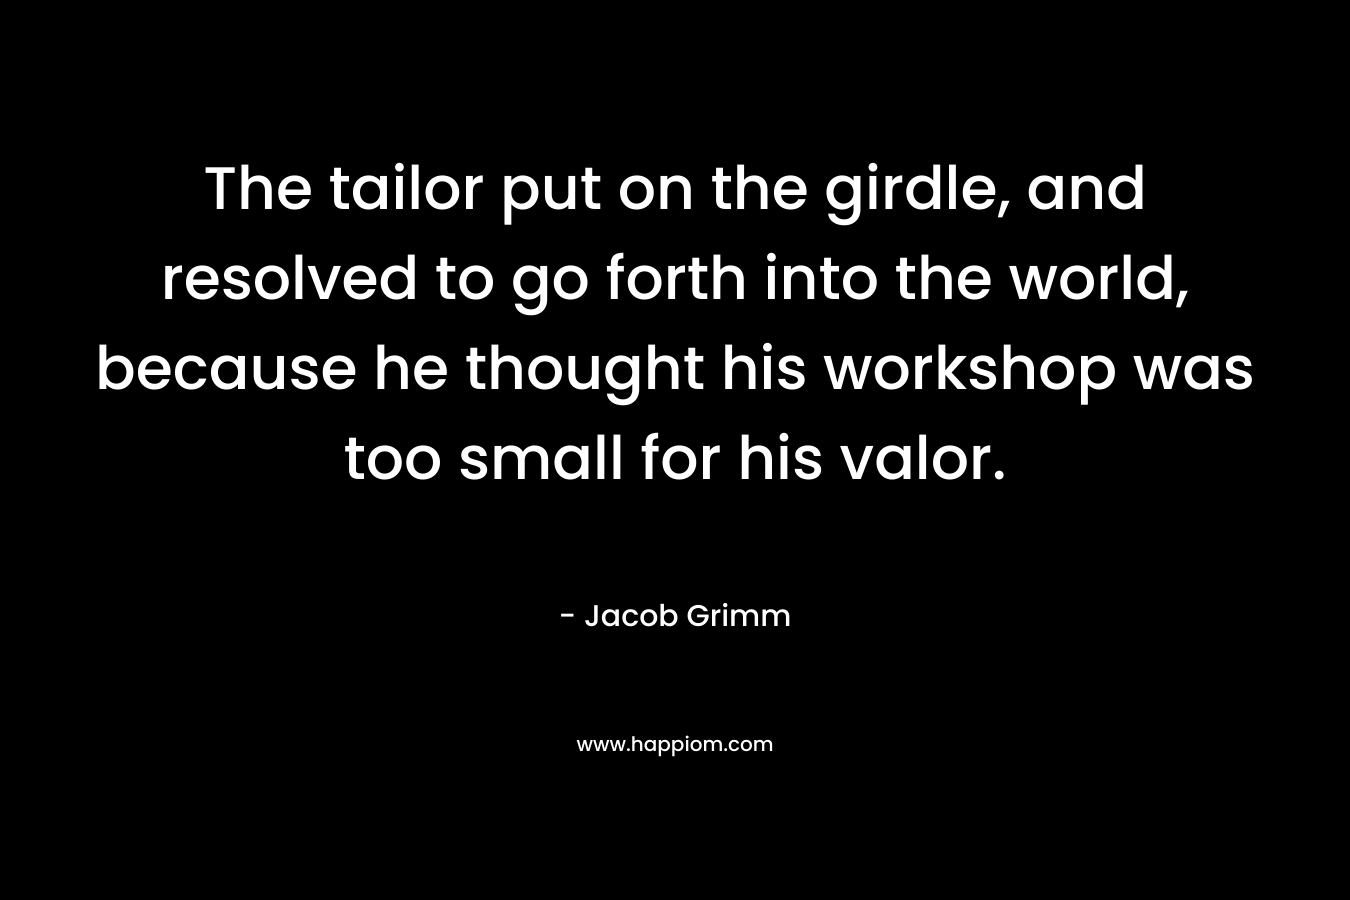 The tailor put on the girdle, and resolved to go forth into the world, because he thought his workshop was too small for his valor. – Jacob Grimm